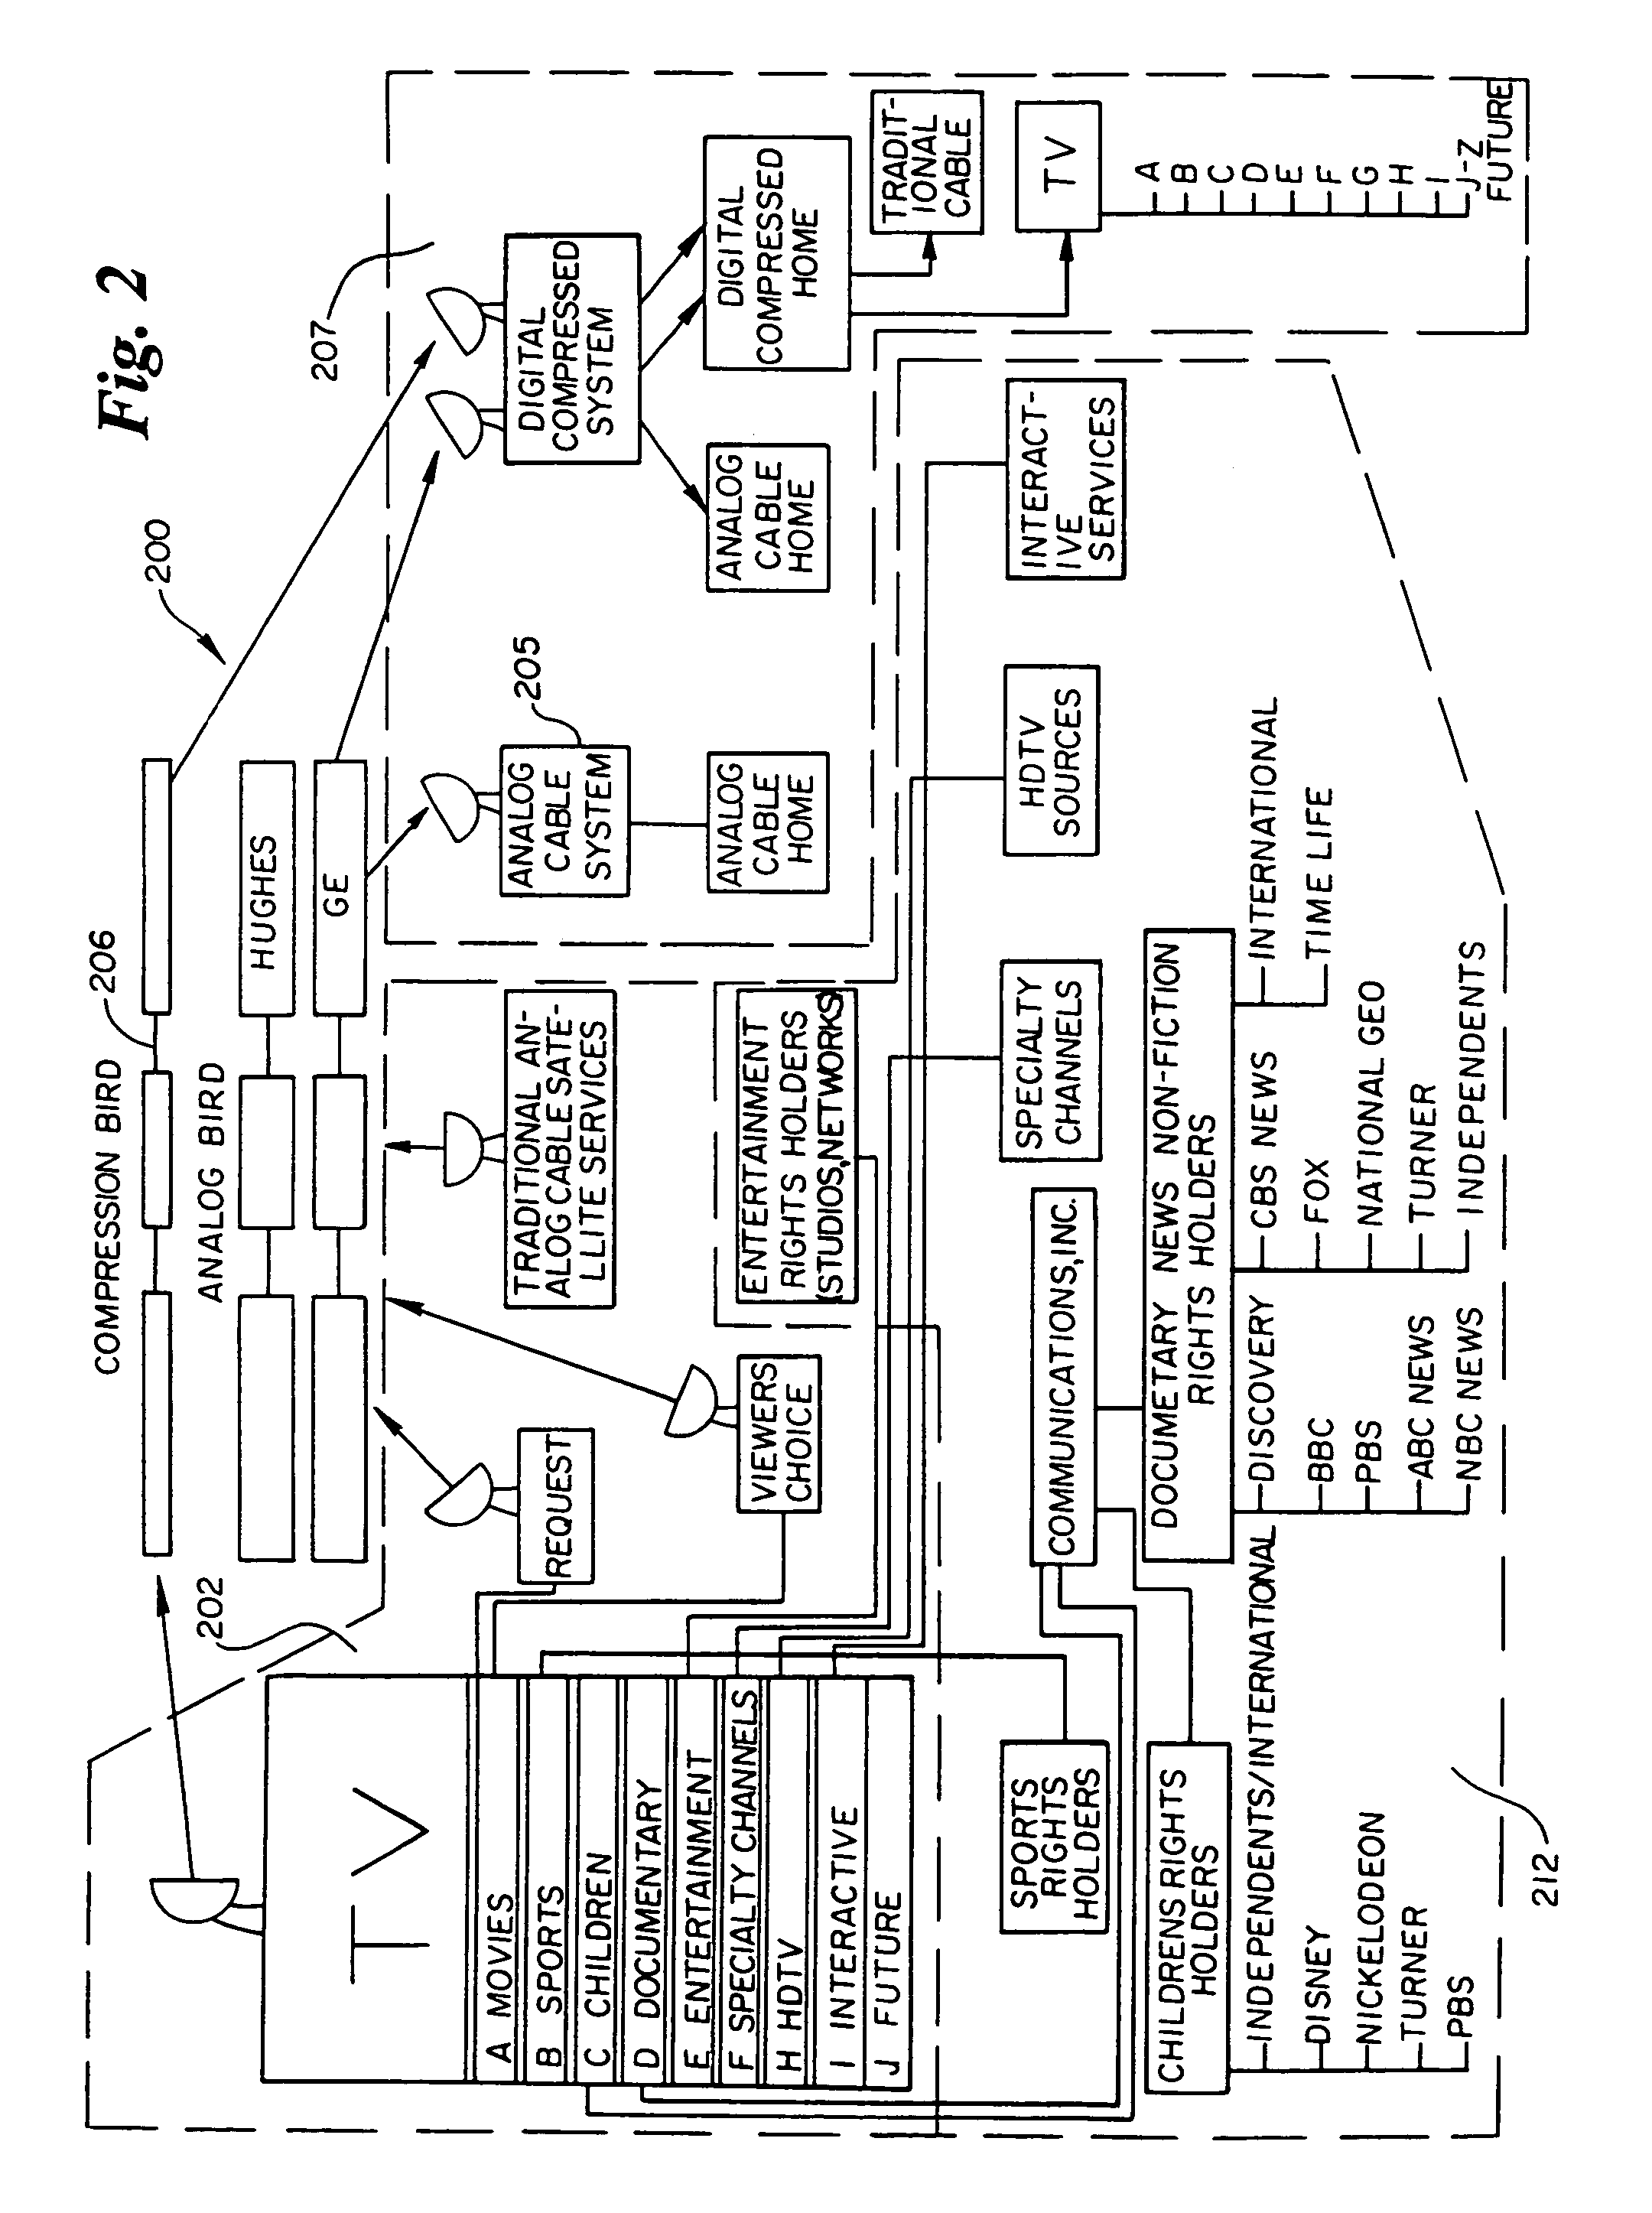 Bandwidth allocation for a television program delivery system